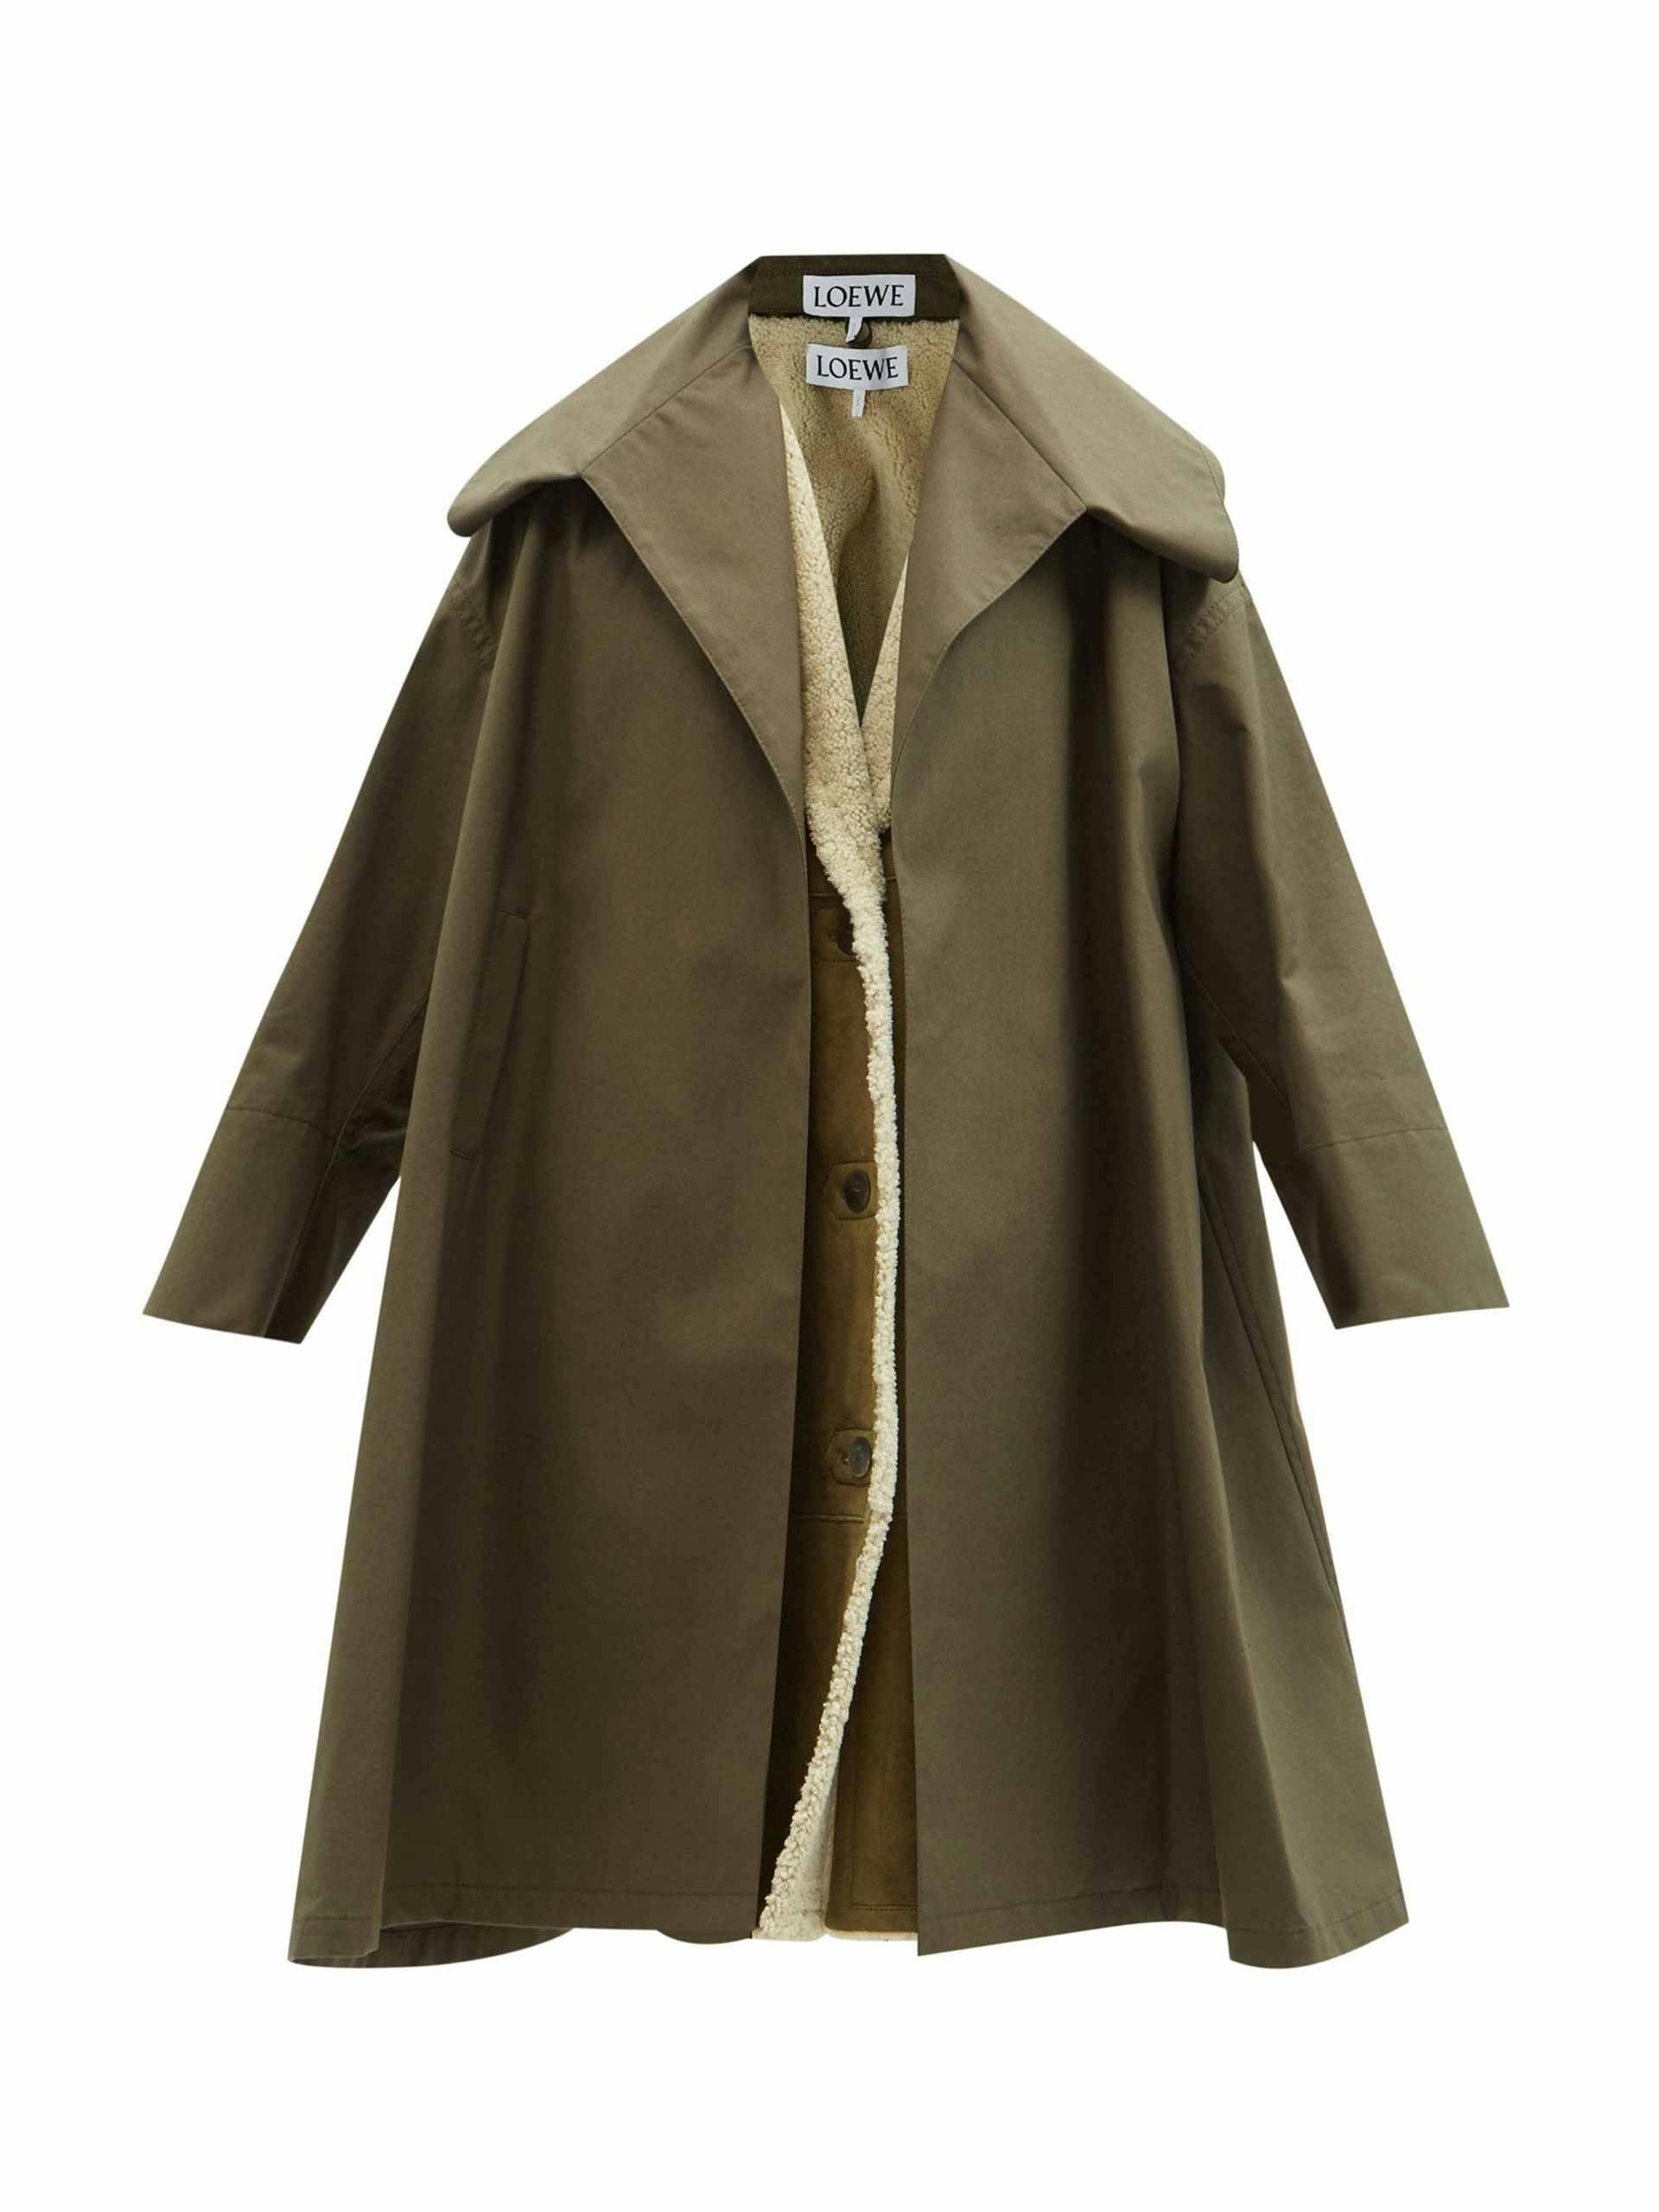 Double-layered cotton and shearling coat